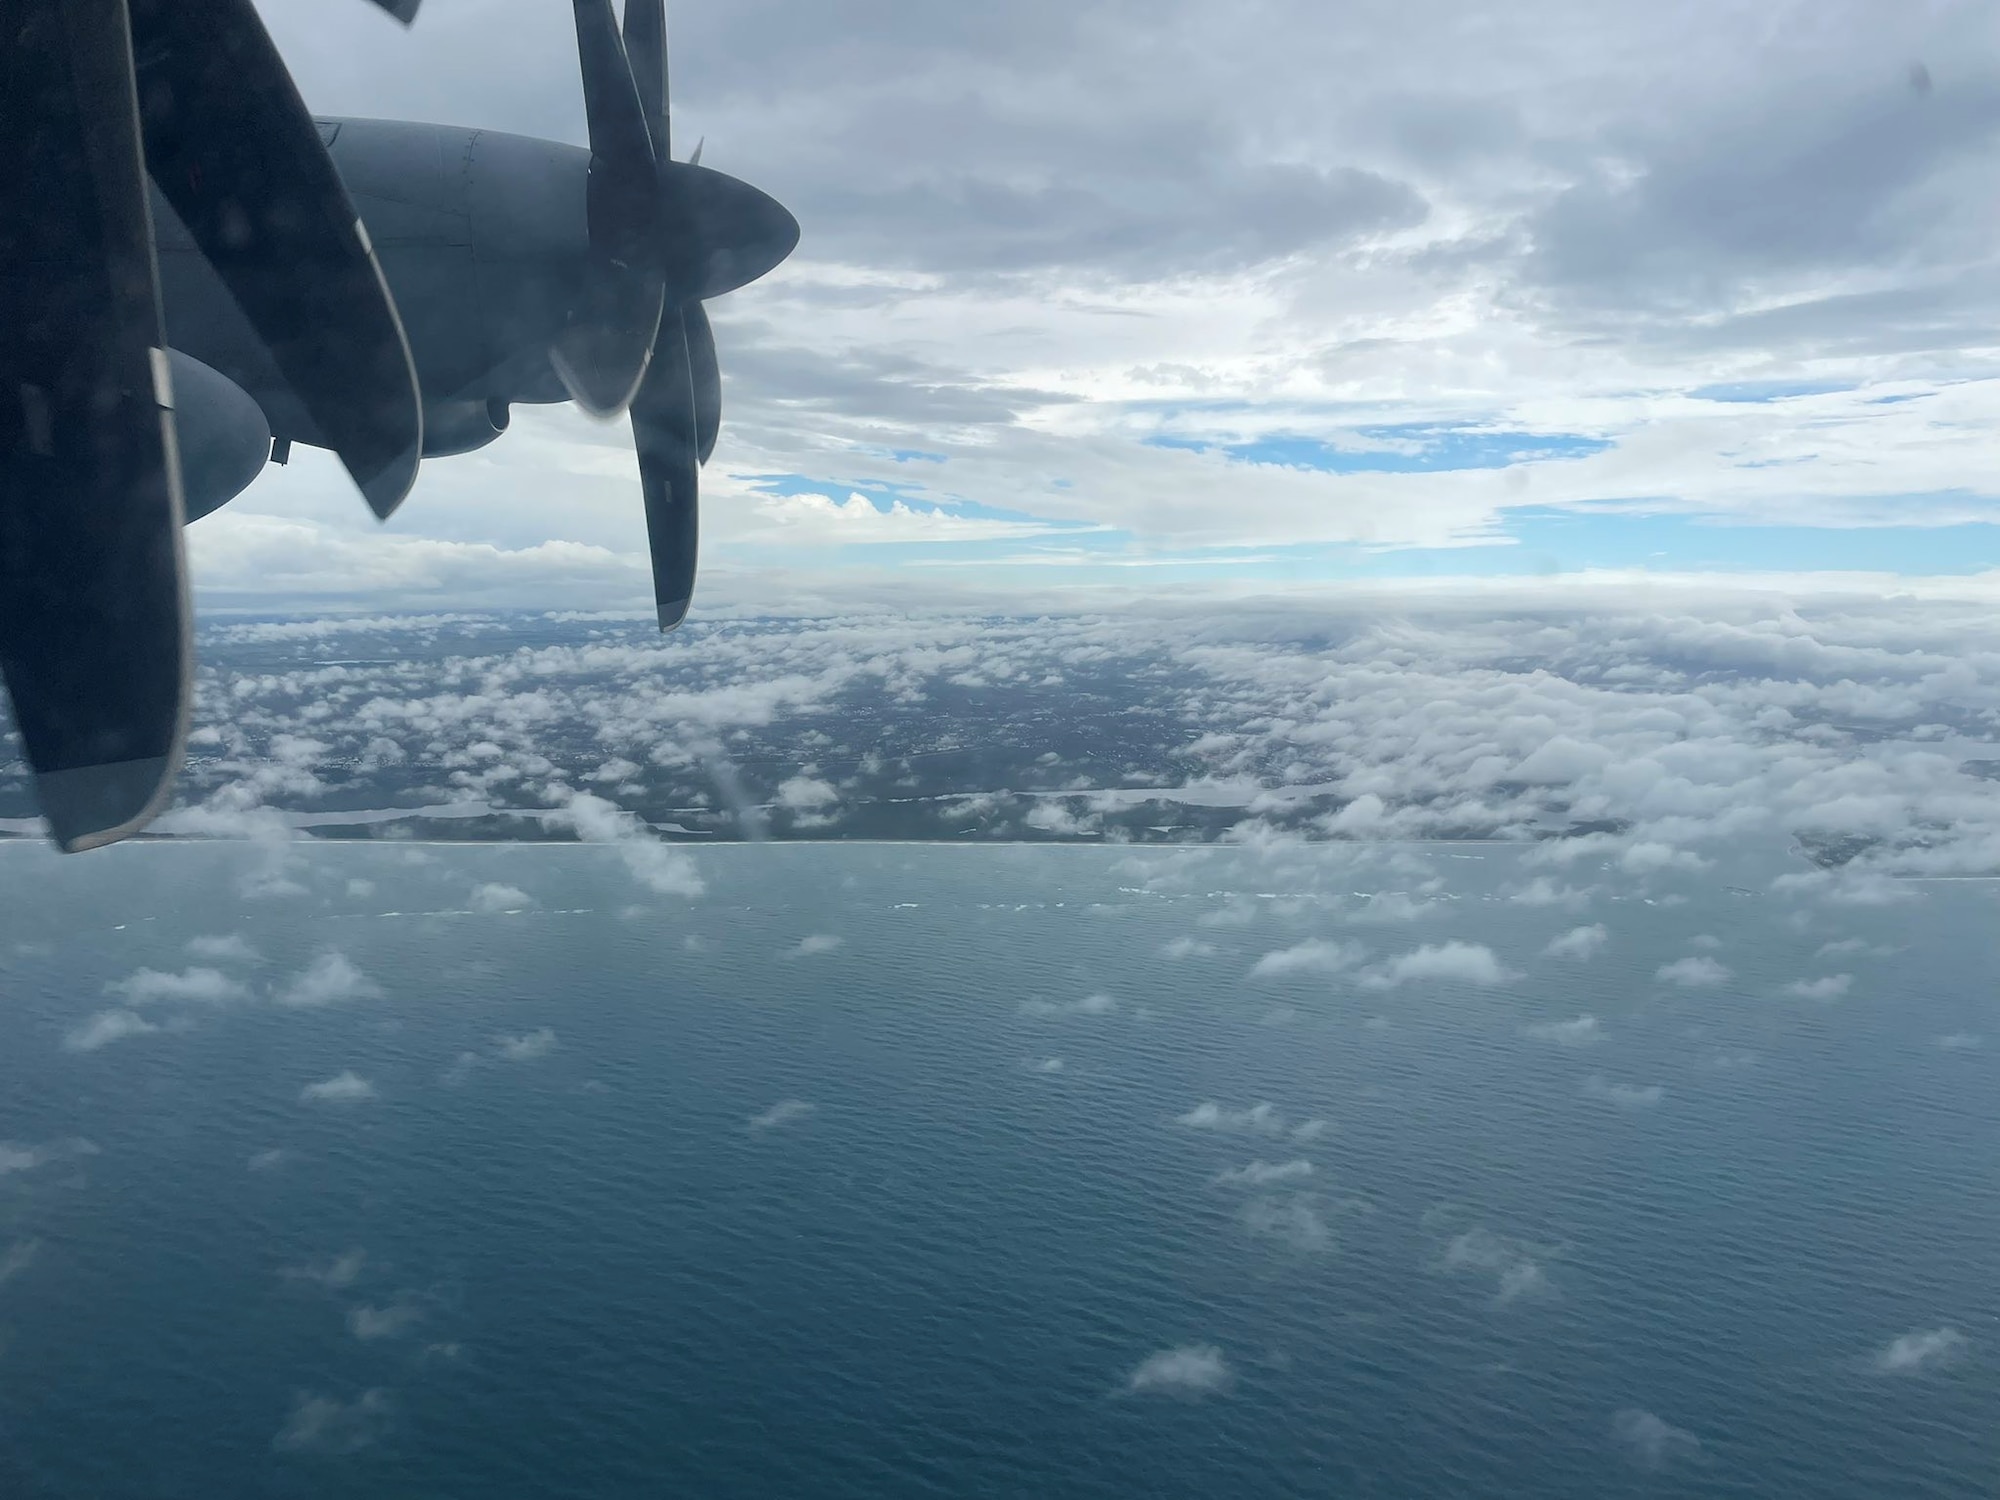 Two WC-130J engines can be seen with ocean, clouds and land in the background.